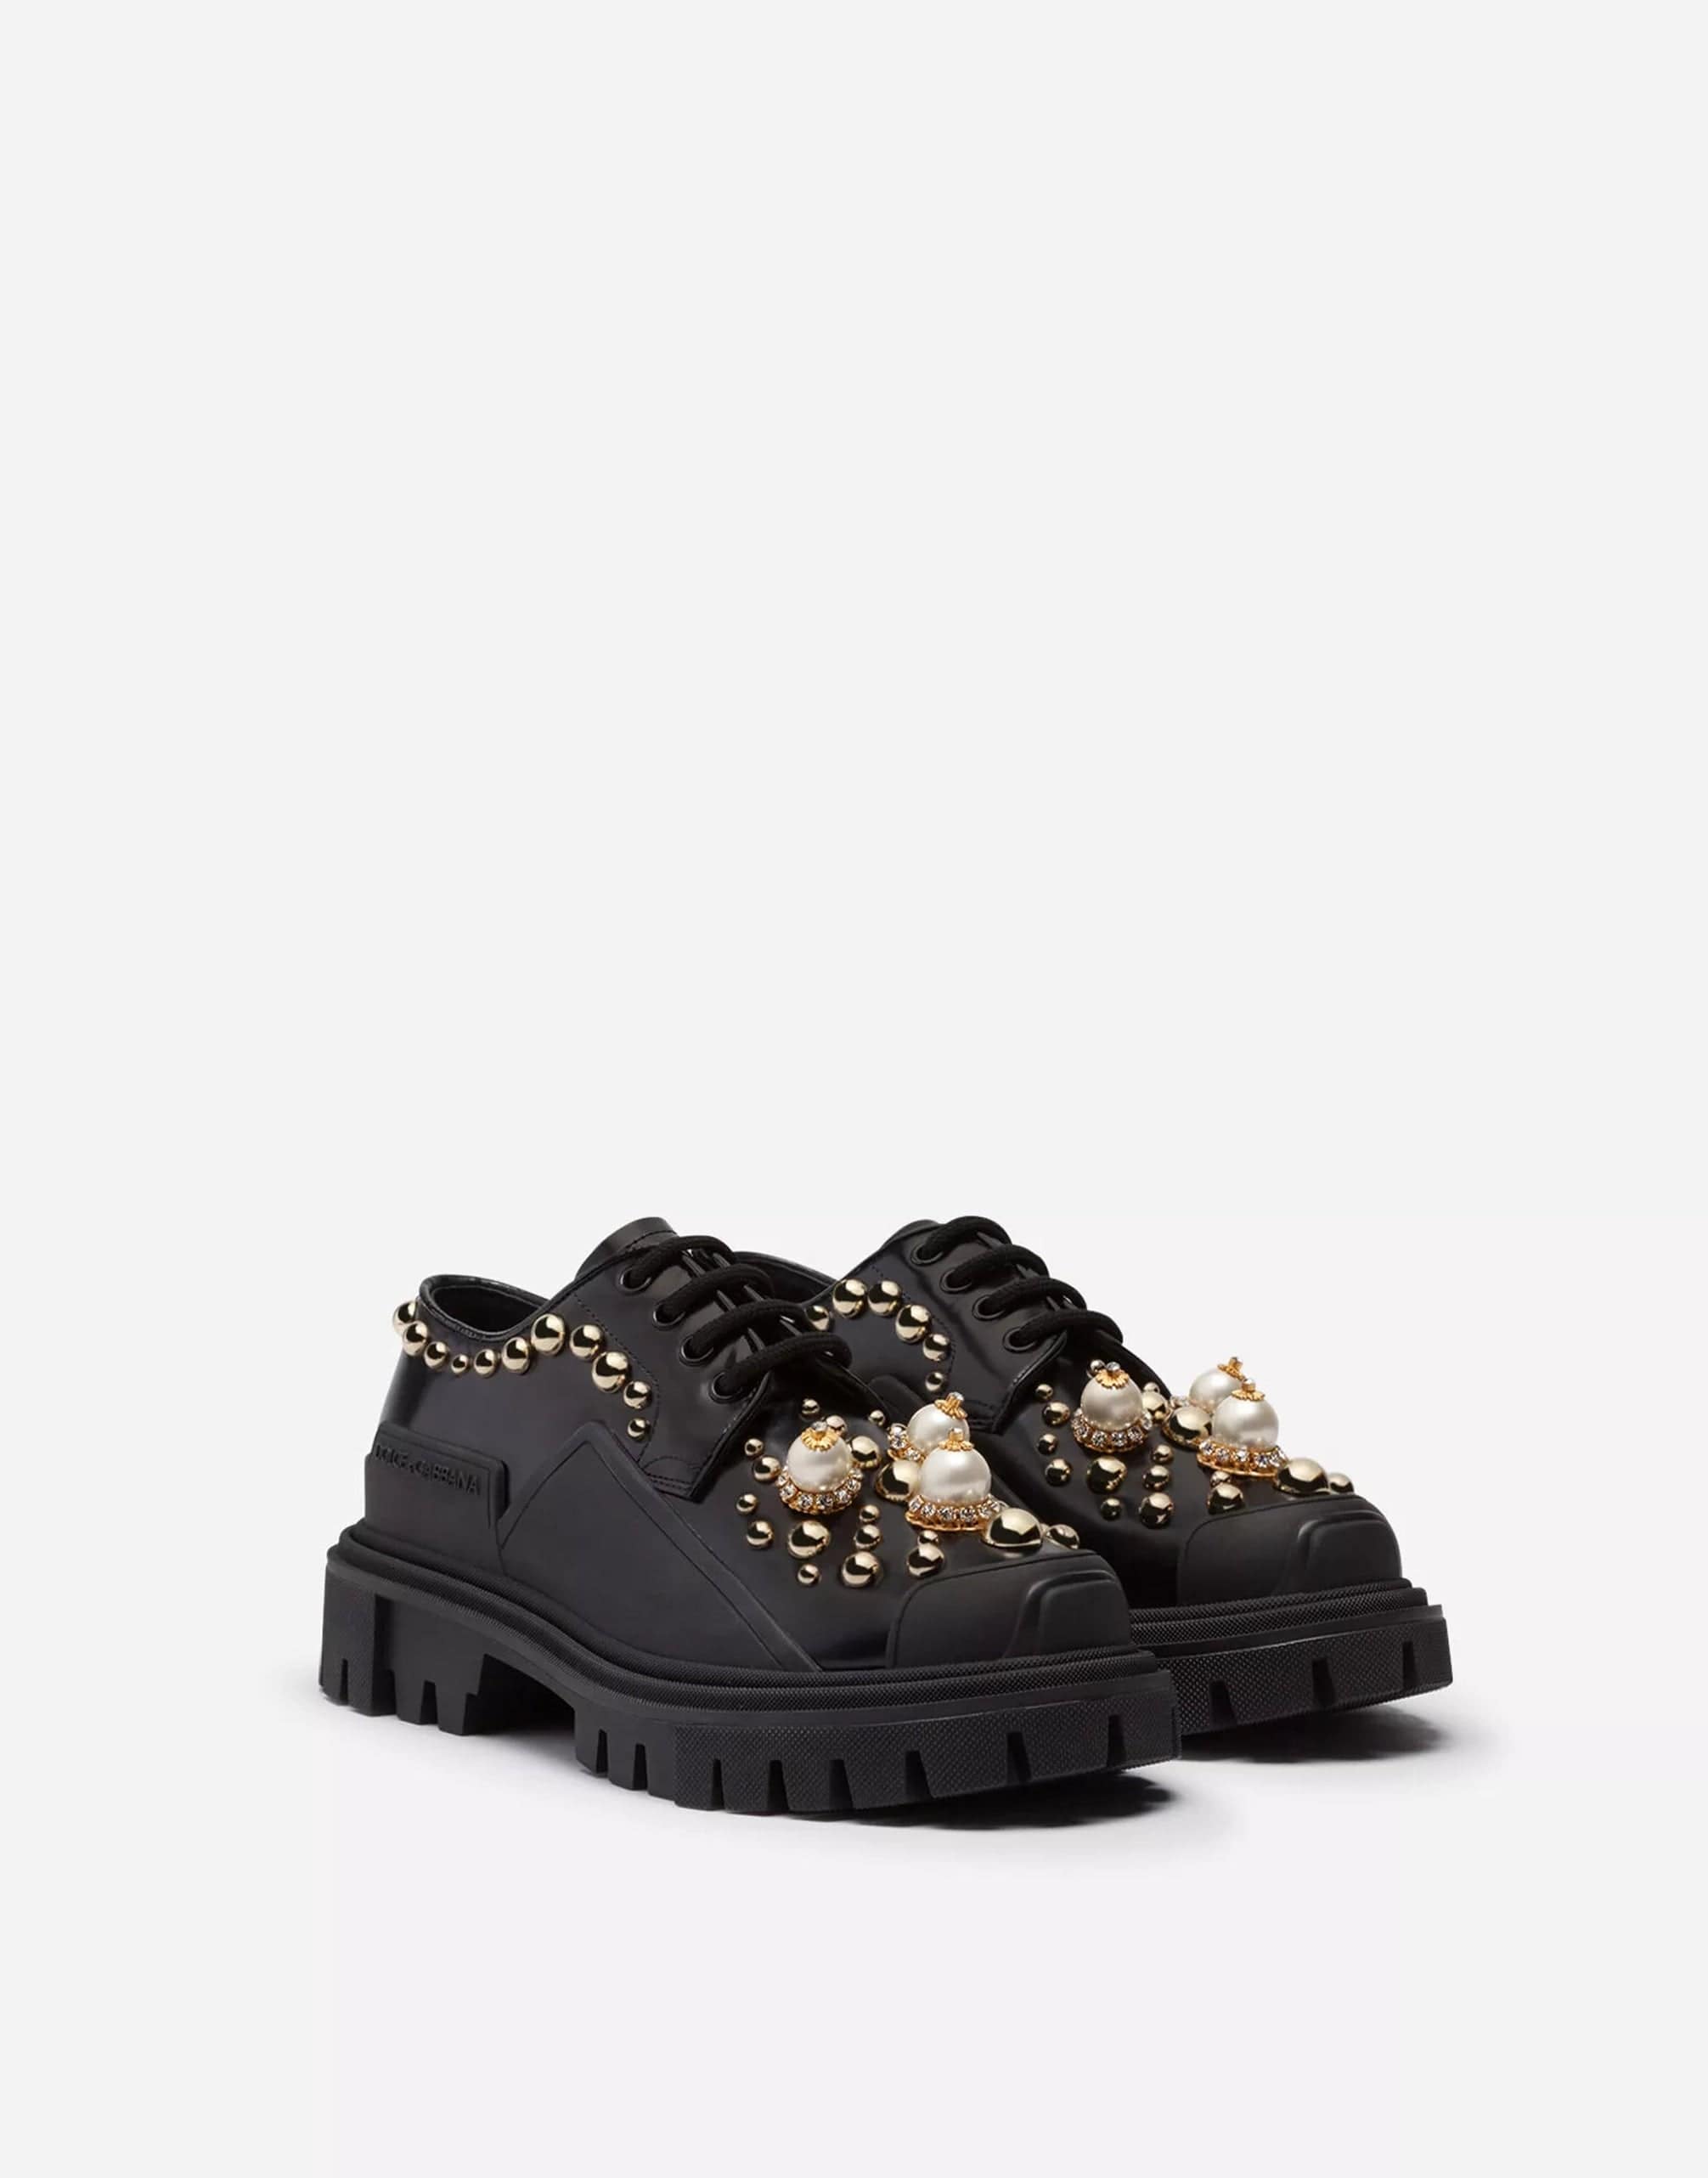 Dolce & Gabbana Pearled And Studded Trekking Derby Shoes